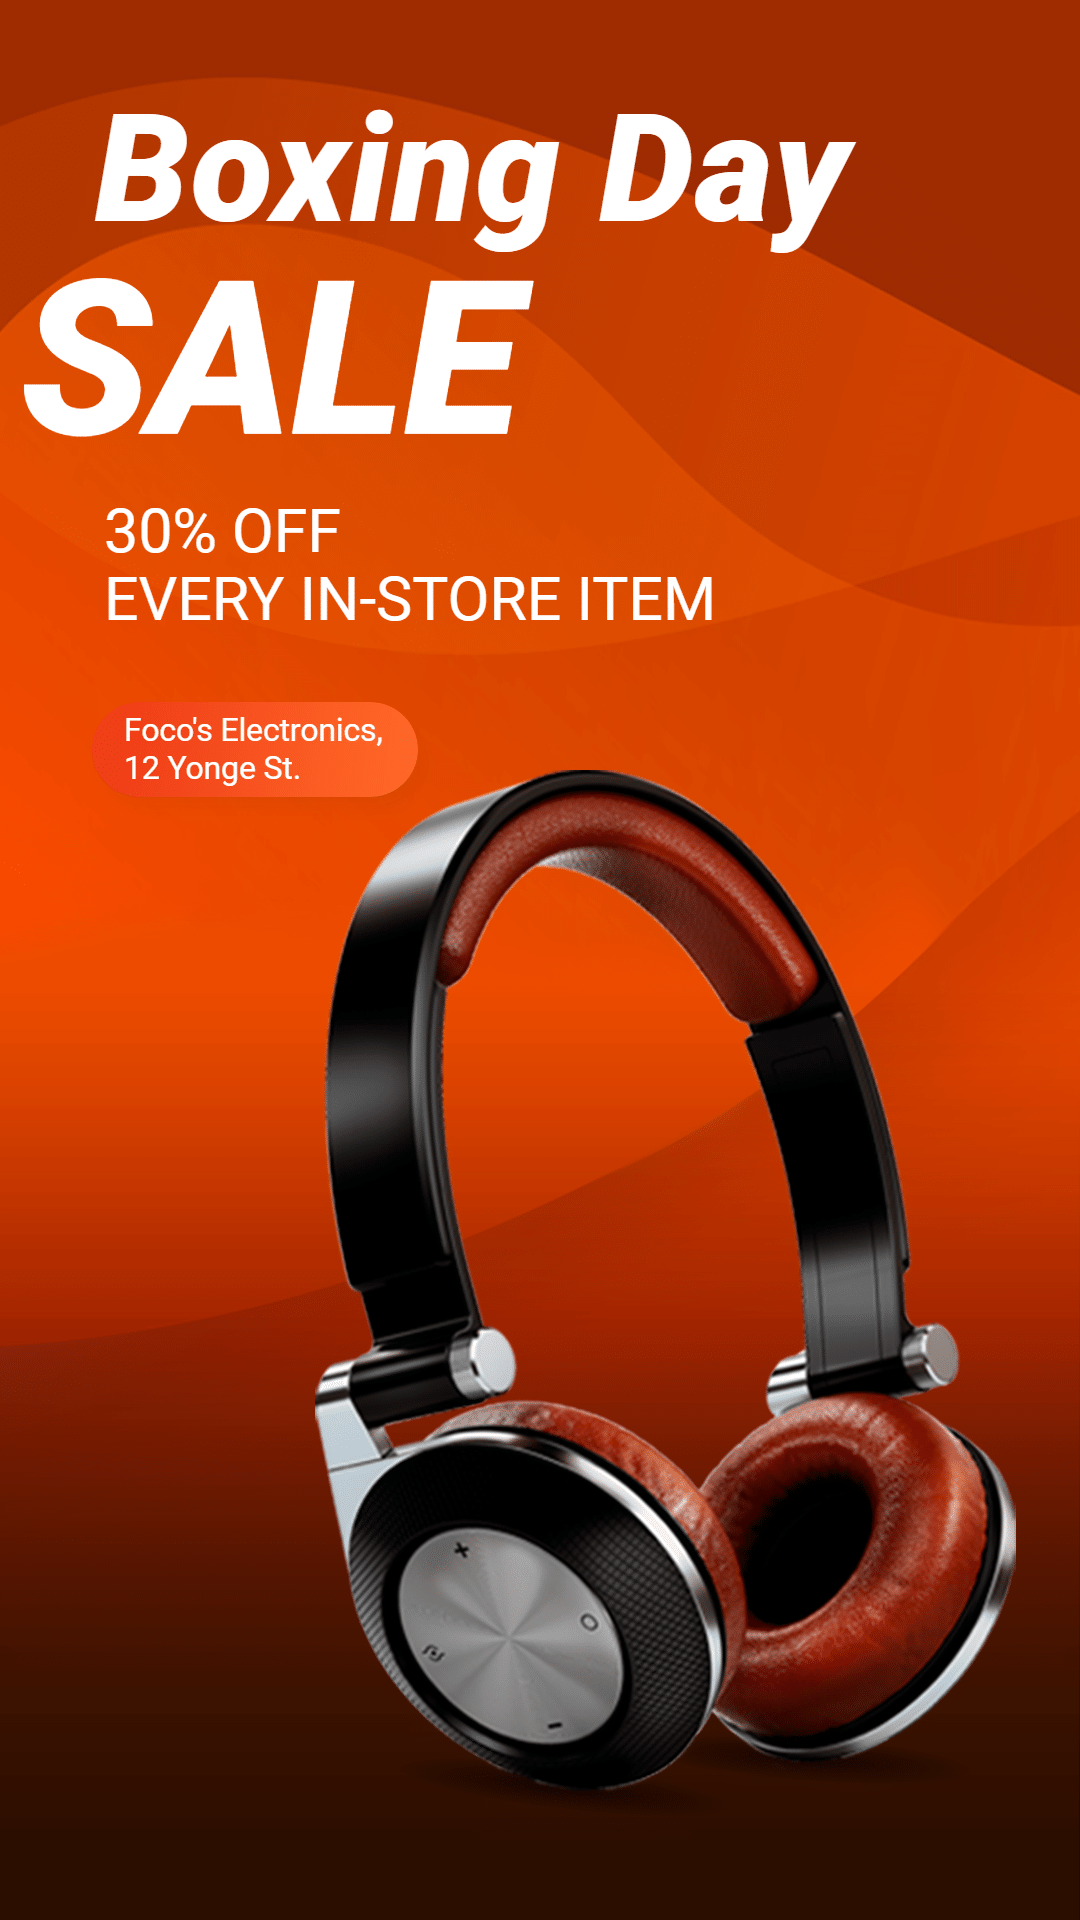 Red Color Block Fashion Headphone Boxing Day Sale Ecommerce Story